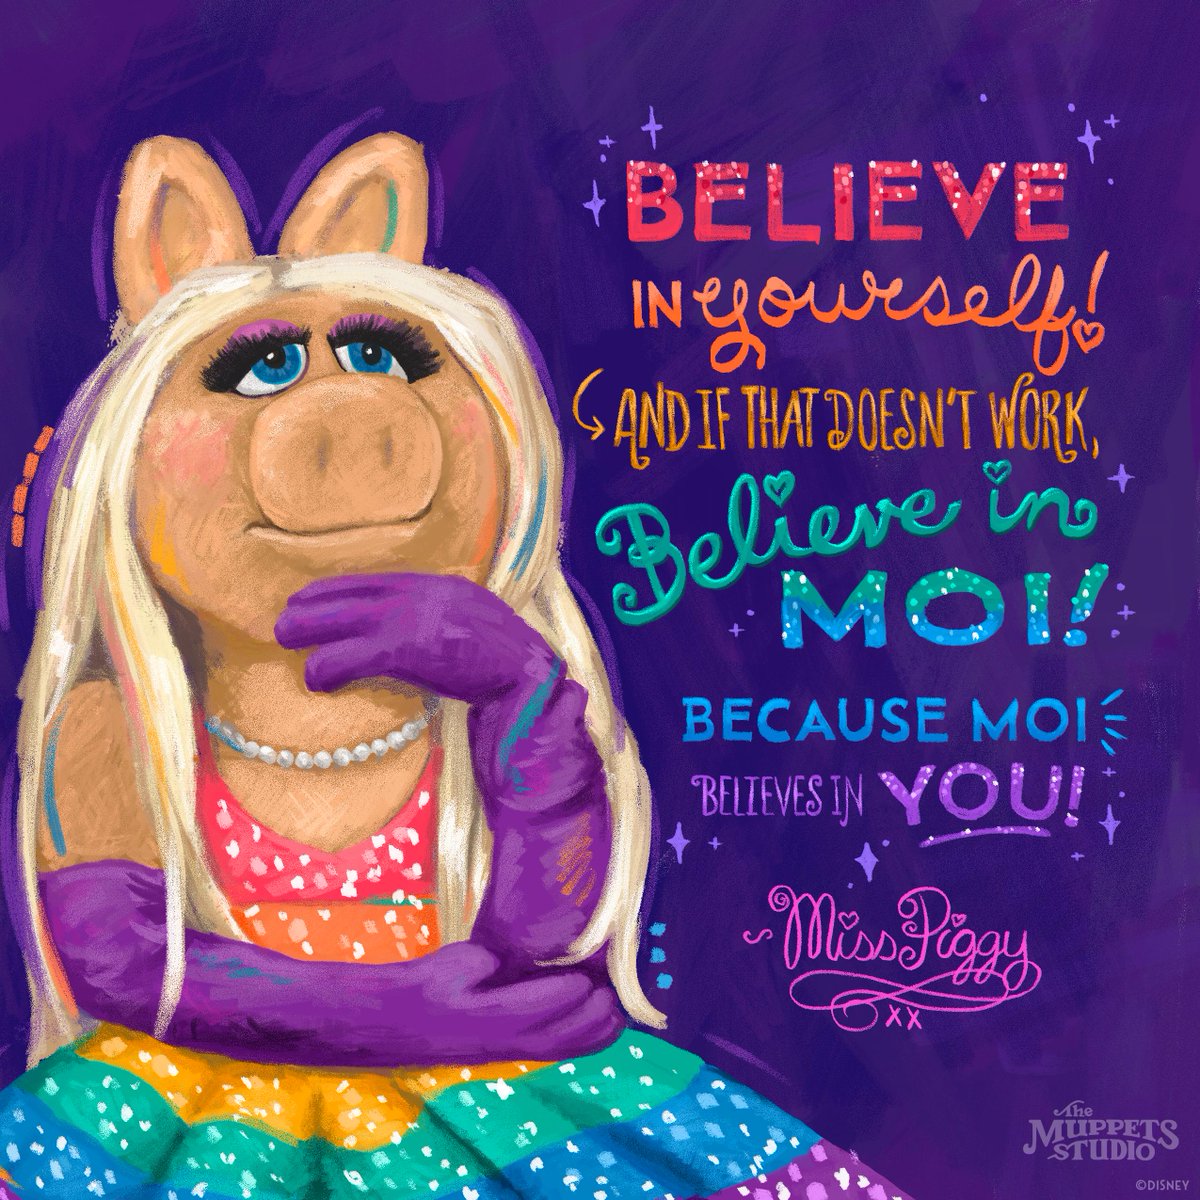 #CelebratePride and celebrate you! This #PrideMonth, remember that @MissPiggy and all of The Muppets believe in you, love you, and support you.